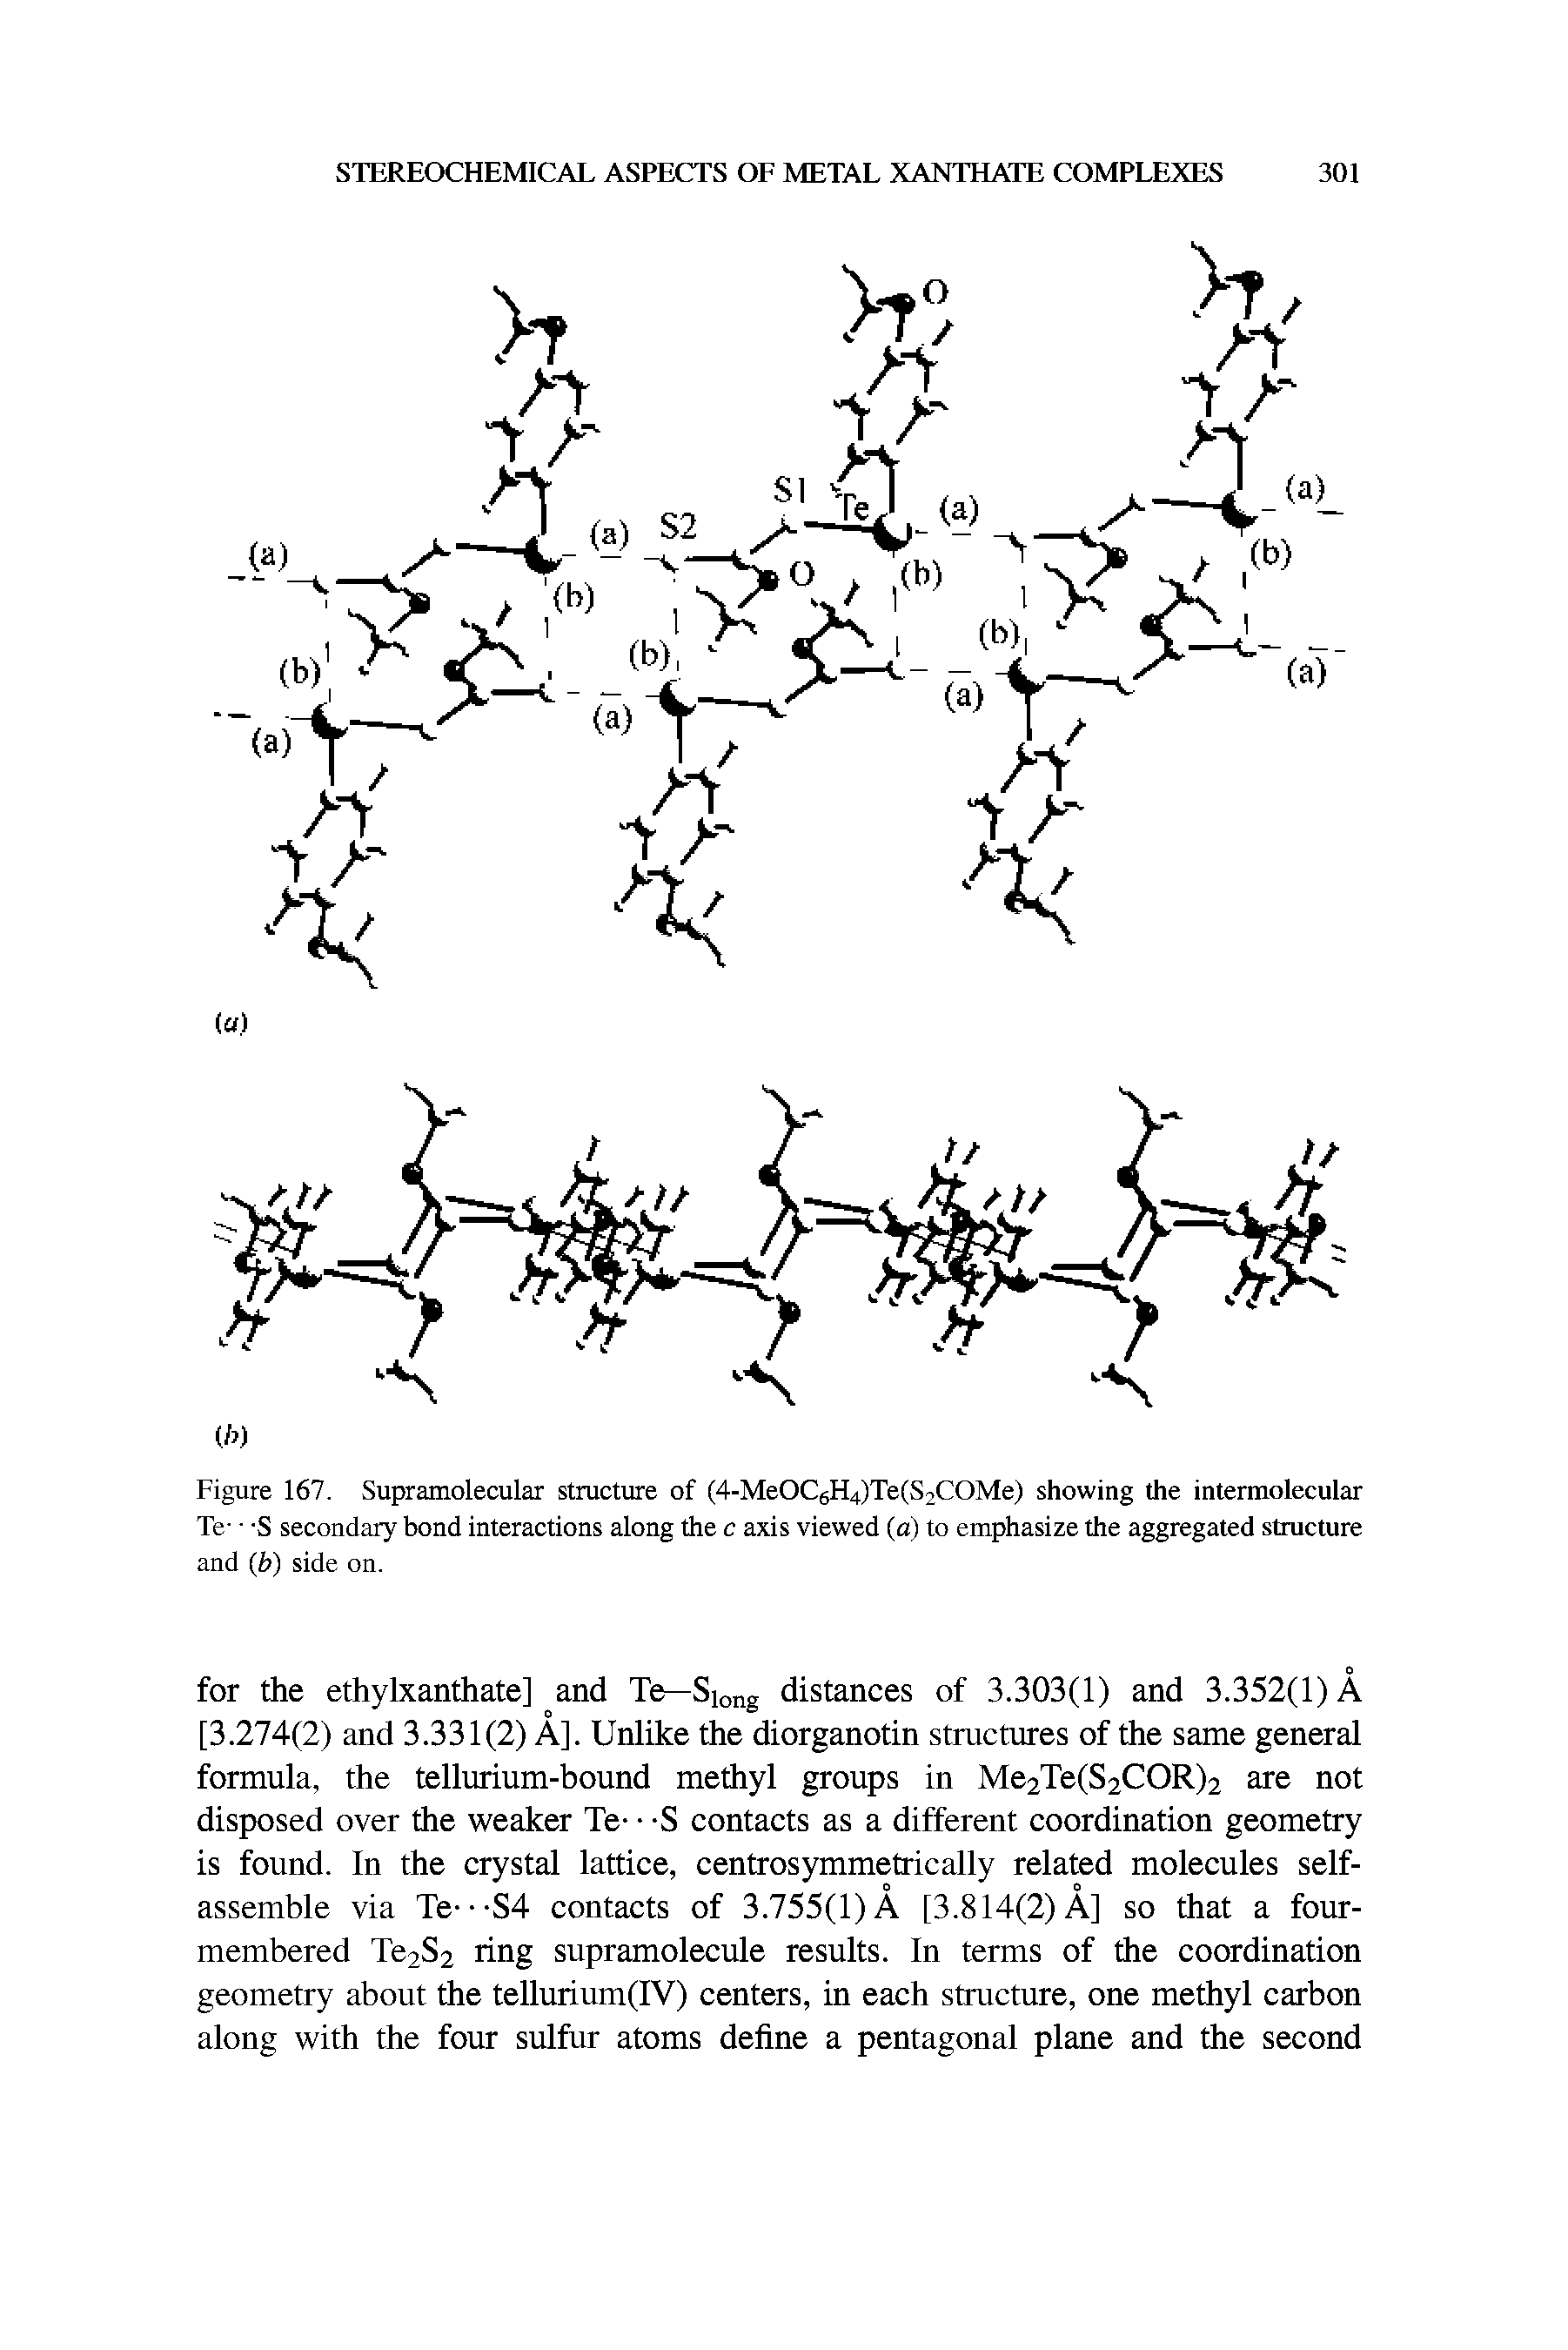 Figure 167. Supramolecular structure of (4-MeOC6H4)Te(S2COMe) showing the intermolecular Te- -S secondary bond interactions along the c axis viewed (a) to emphasize the aggregated structure and (b) side on.